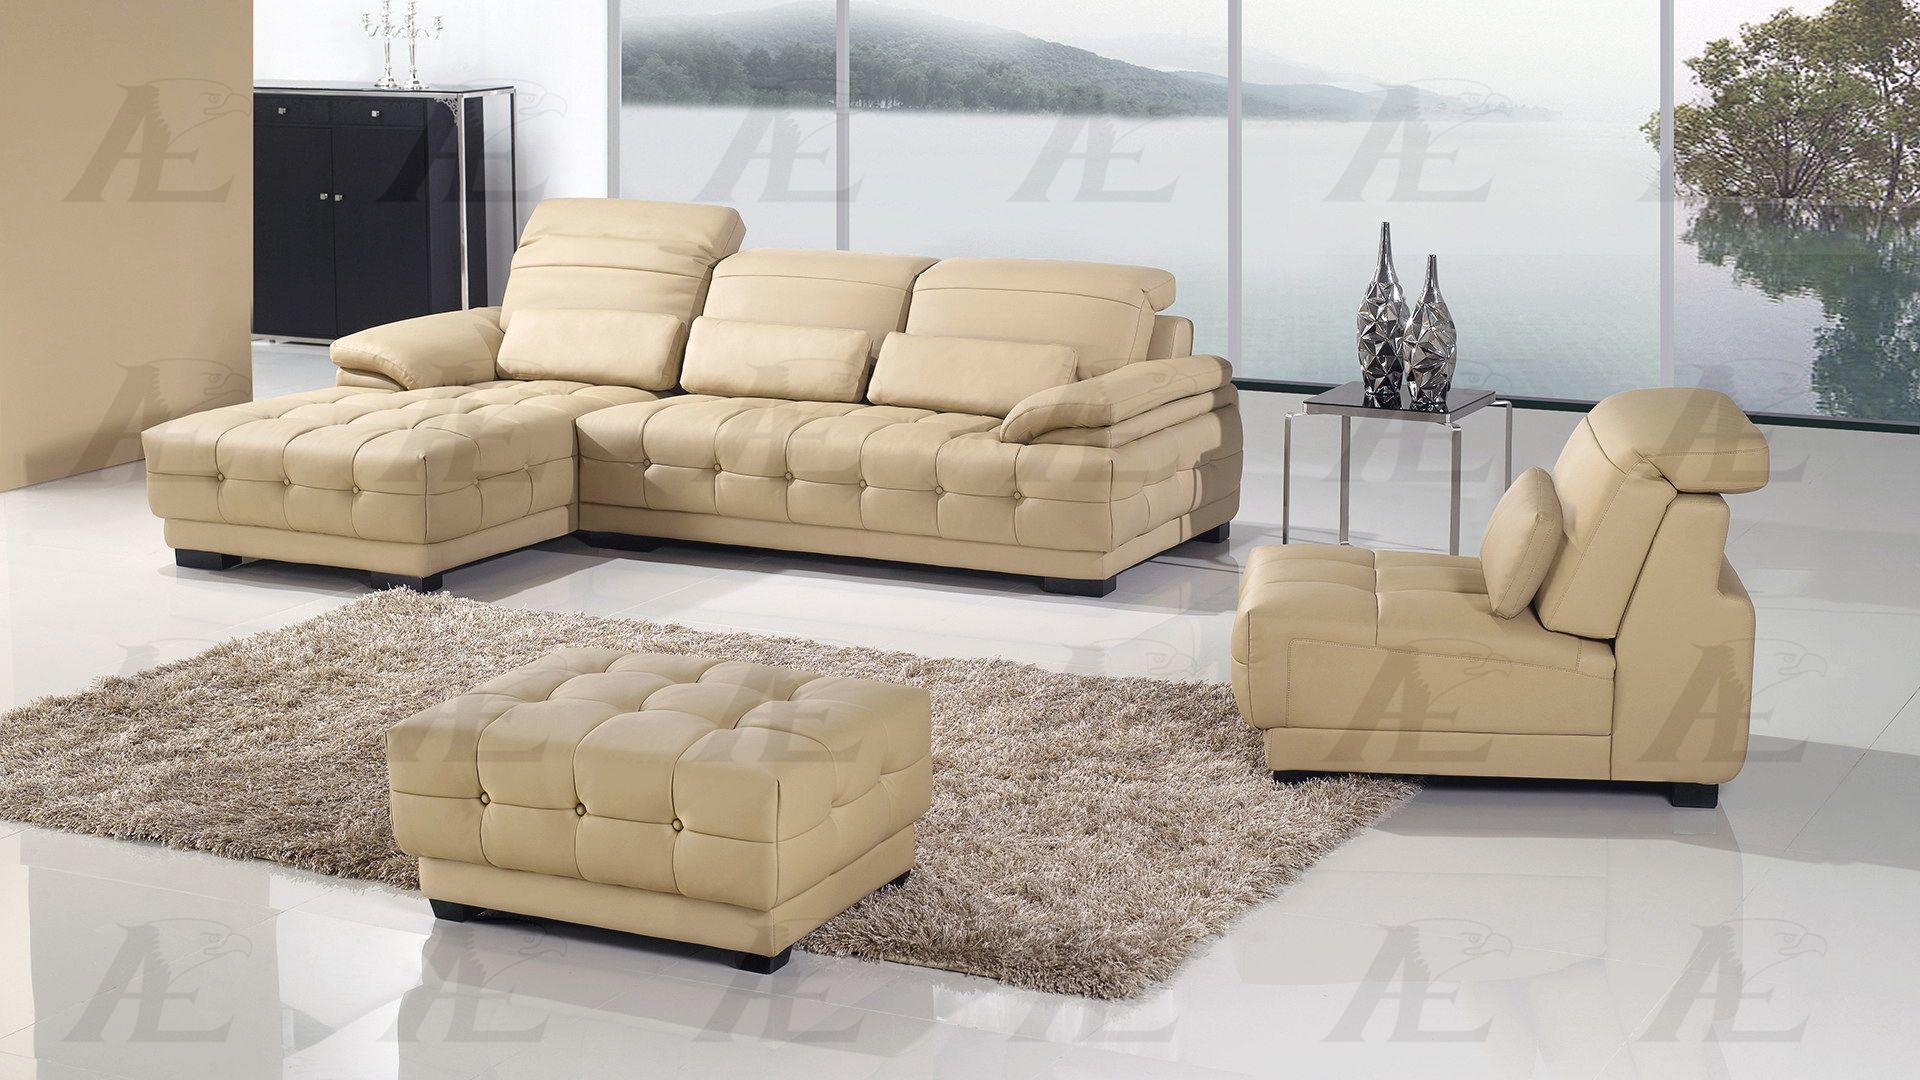 

    
American Eagle Furniture AE-L296-CA Camel Sofa Chaise Chair and Ottoman Set Left Hand Chase Bonded Leather 4Pcs
